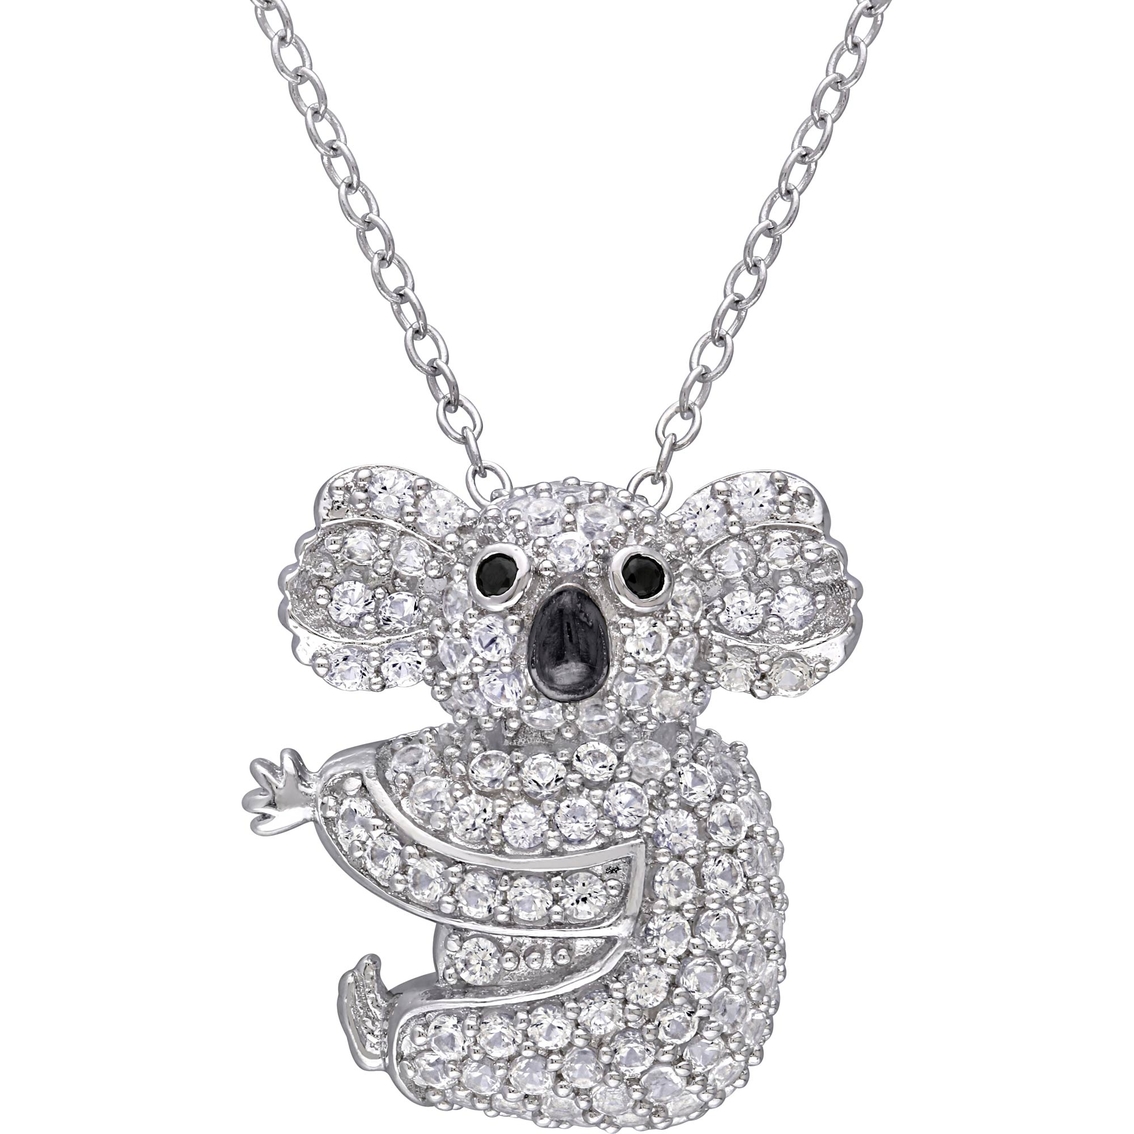 Sofia B. Sterling Silver Lab Created White Sapphire and Black Spinel Koala Necklace - Image 1 of 3